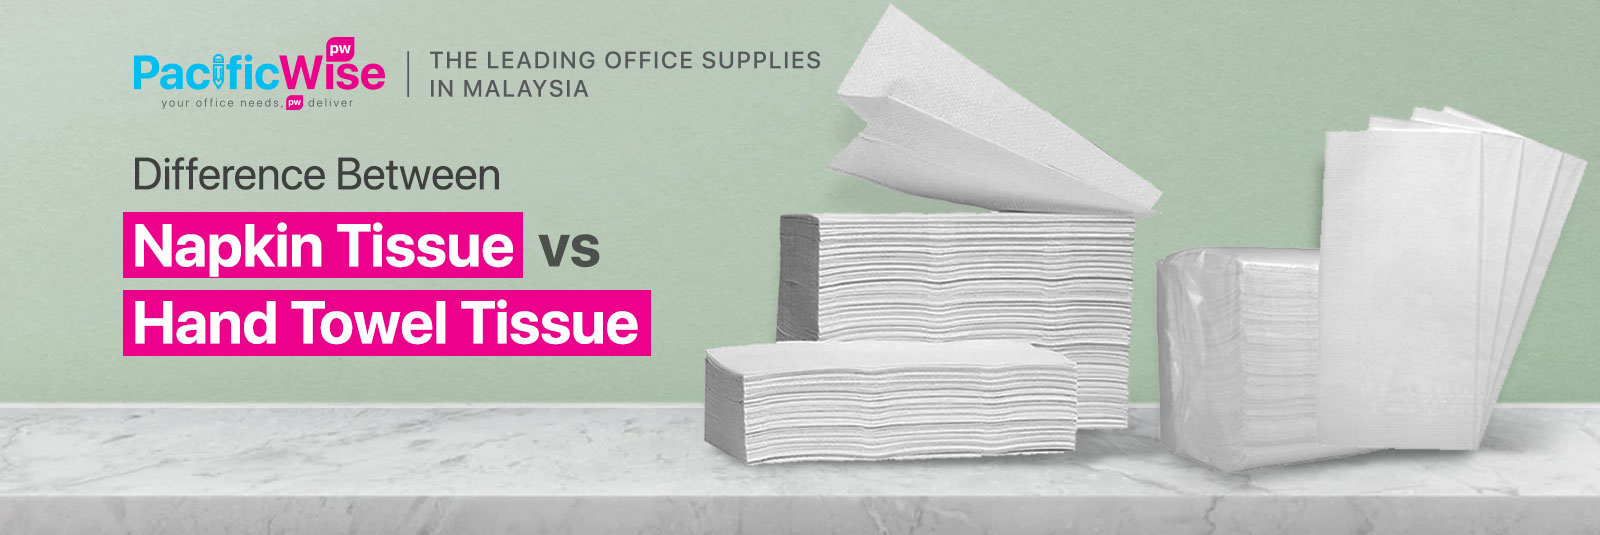 Difference Between Napkin Tissue vs Hand Towel Tissue